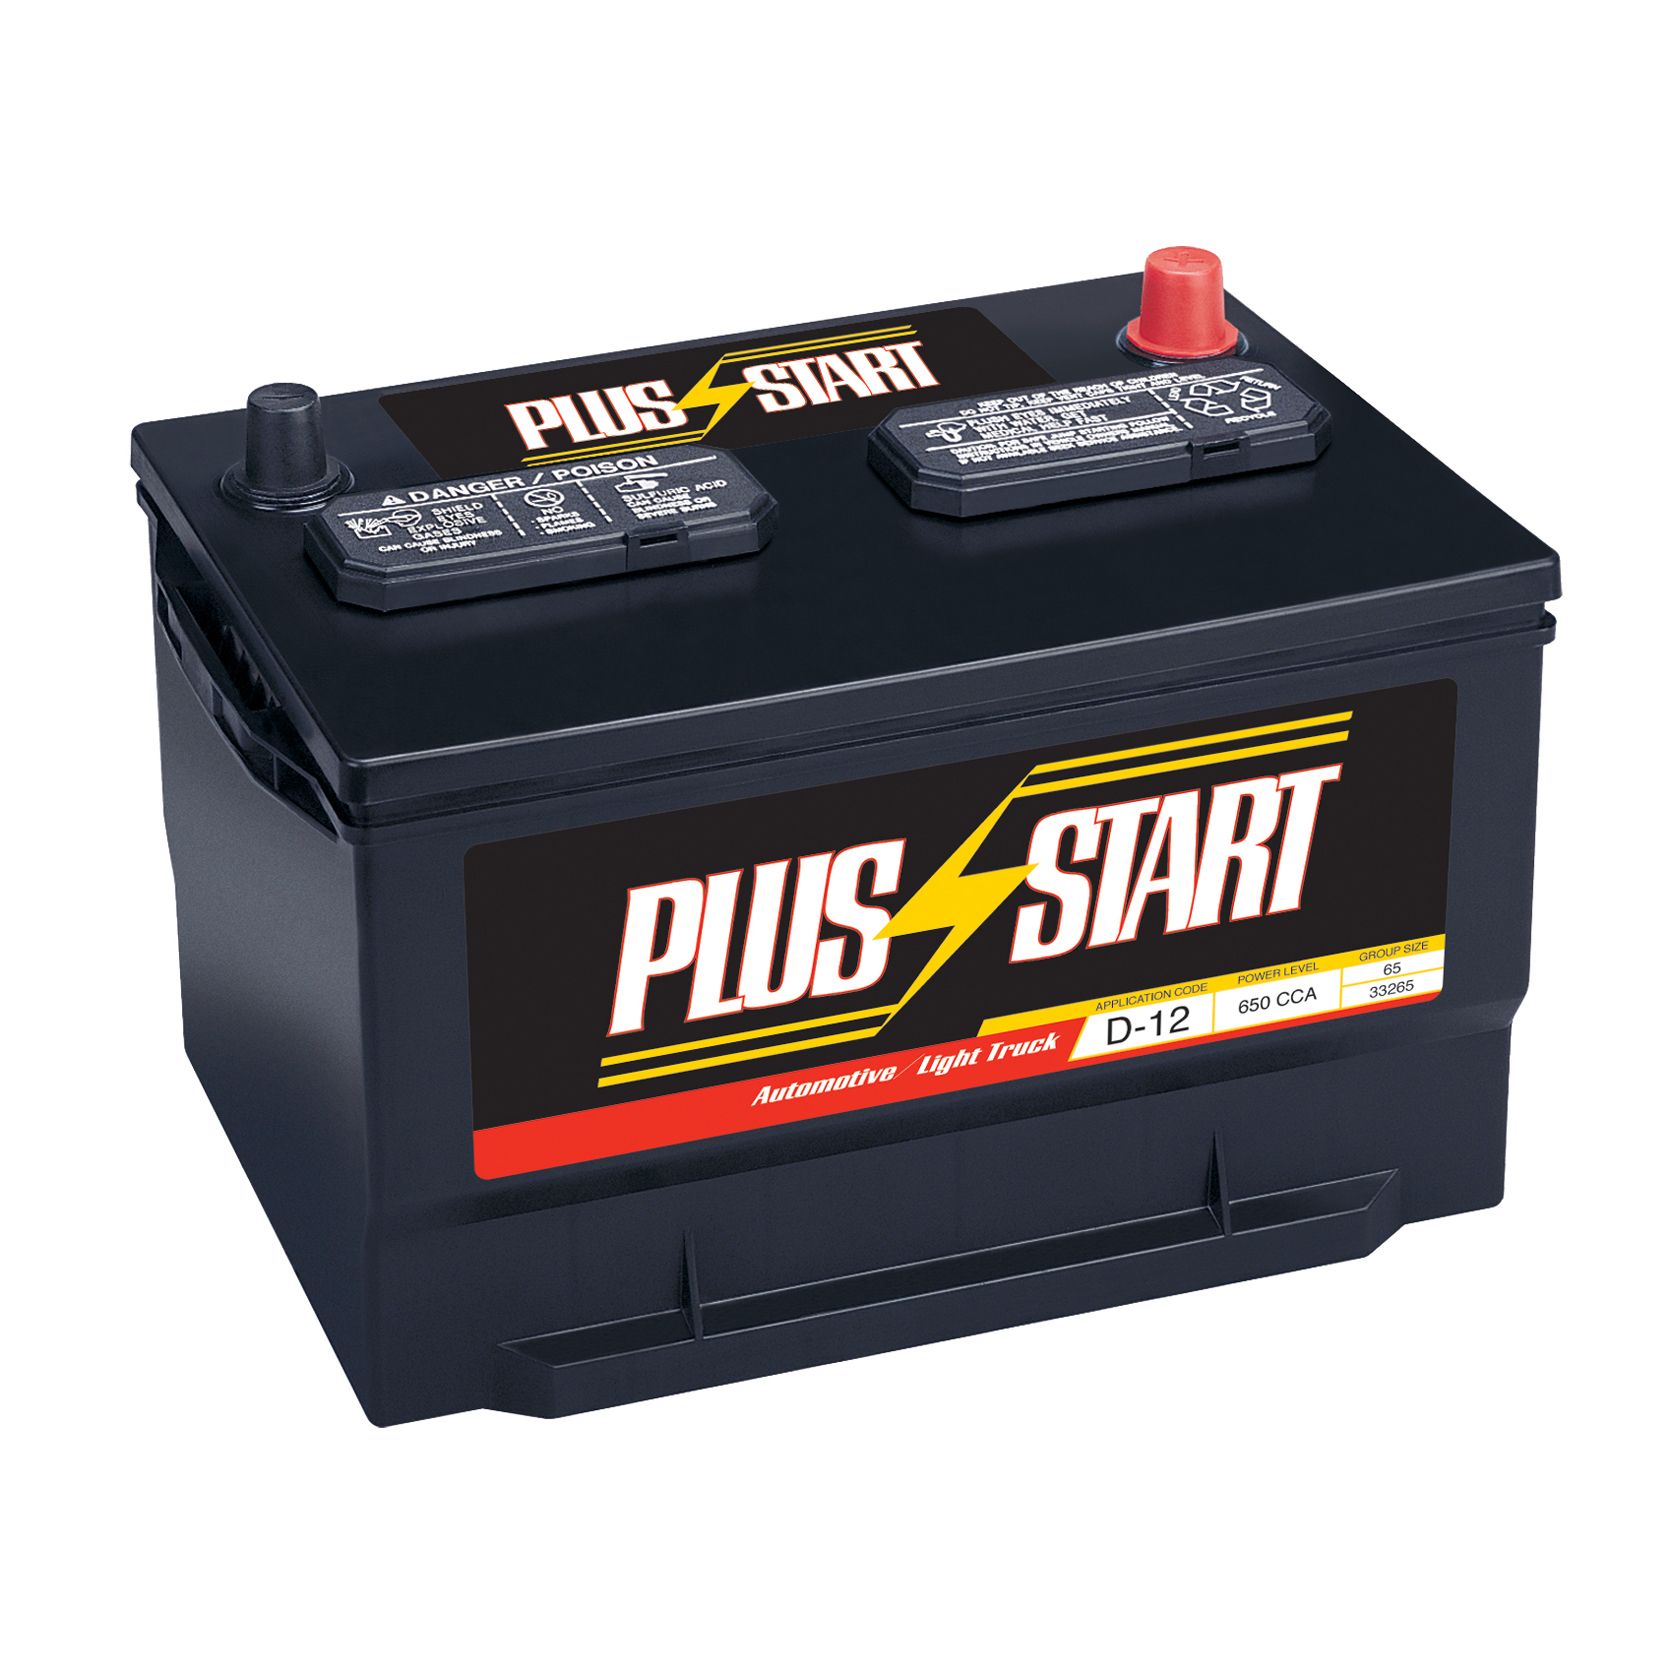 Plus Start Automotive Battery - Group Size 65 (Price with Exchange)